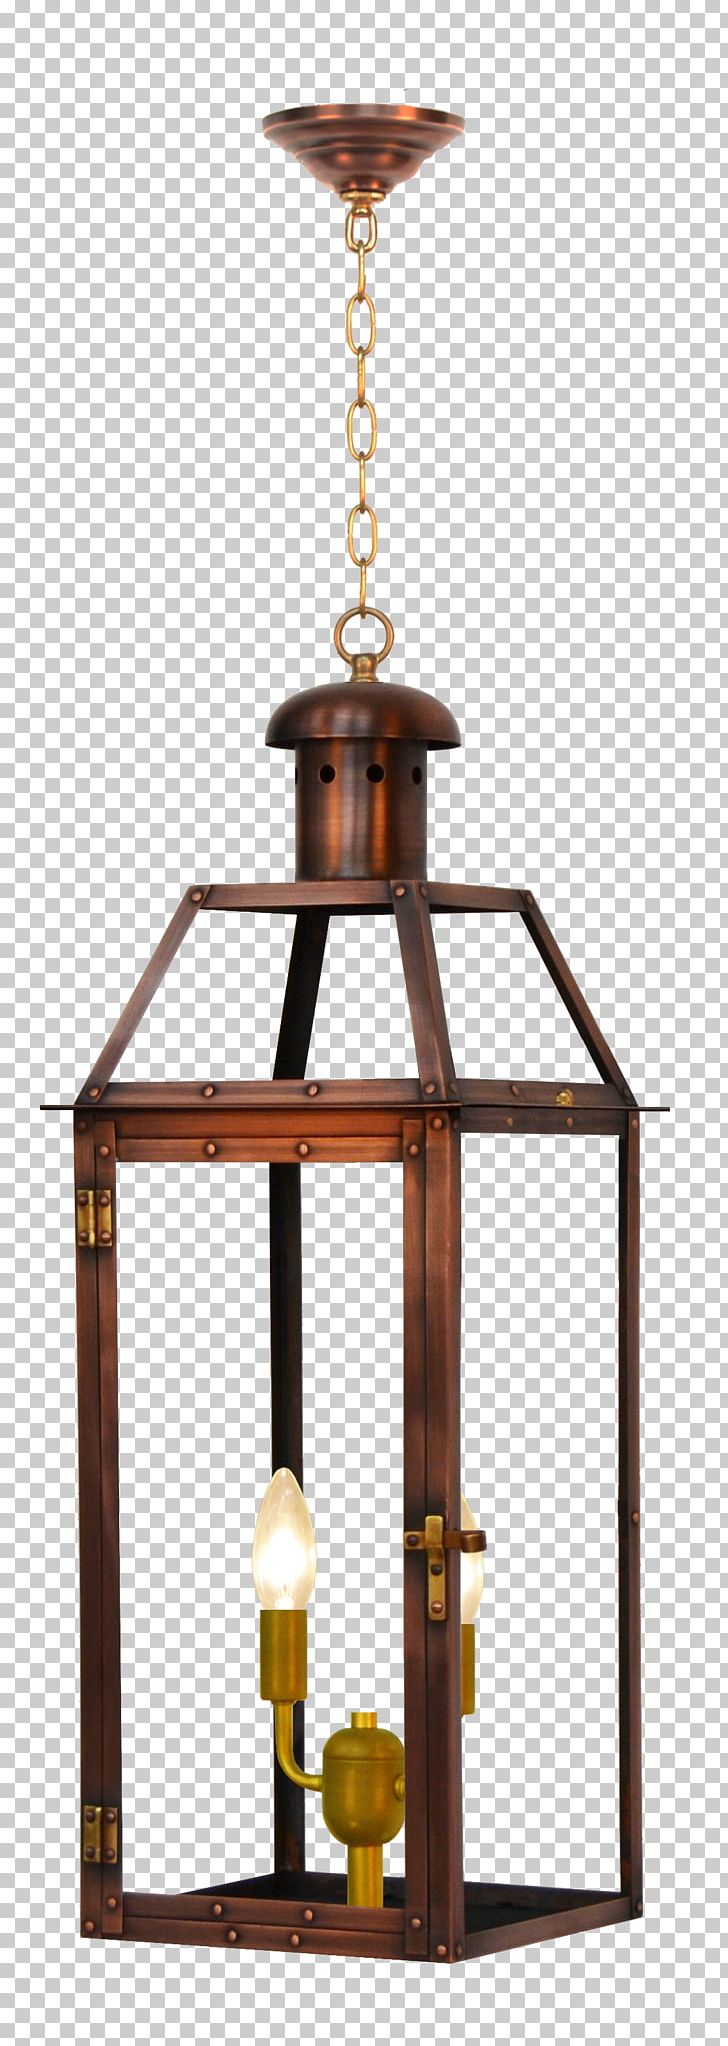 Gas Lighting Lantern Light Fixture PNG, Clipart, Ceiling, Ceiling Fans, Ceiling Fixture, Coppersmith, Electricity Free PNG Download